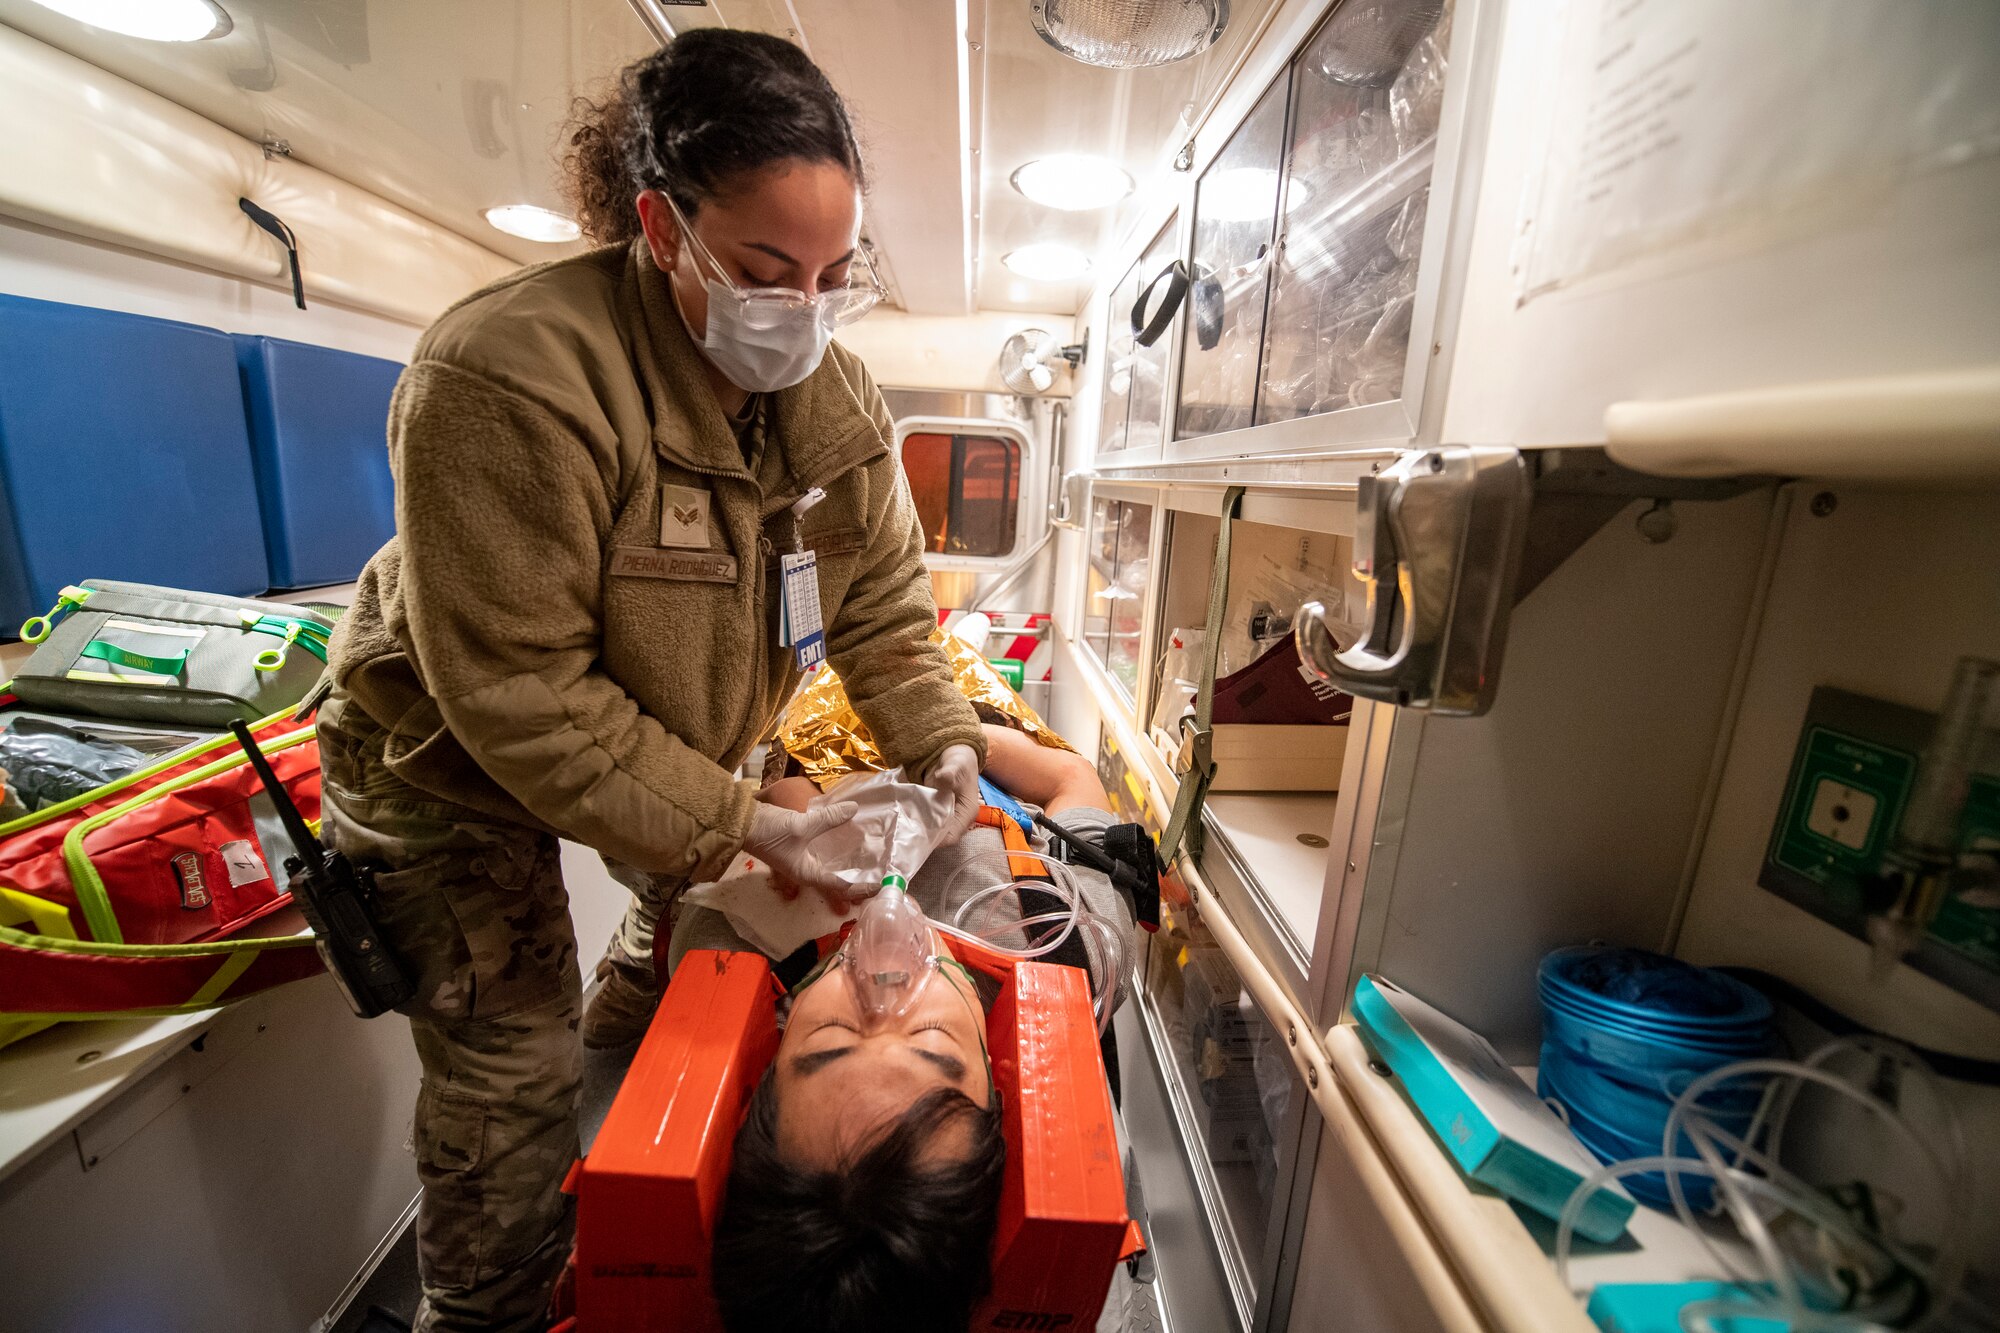 U.S. Air Force Senior Airman Yanill Pierna Rodriguez, 51st Medical Group (MDG) emergency medical technician, delivers oxygen to Kwang Pil Pak, 51st MDG warrior medicine clinic administrator and simulated trauma patient, in the back of an ambulance enroute to urgent care on Osan Air Base, Republic of Korea, Feb. 28, 2023. Pierna Rodriguez treated the simulated patient who was a victim of multiple stab wounds. (U.S. Air Force photo by Airman 1st Class Aaron Edwards)